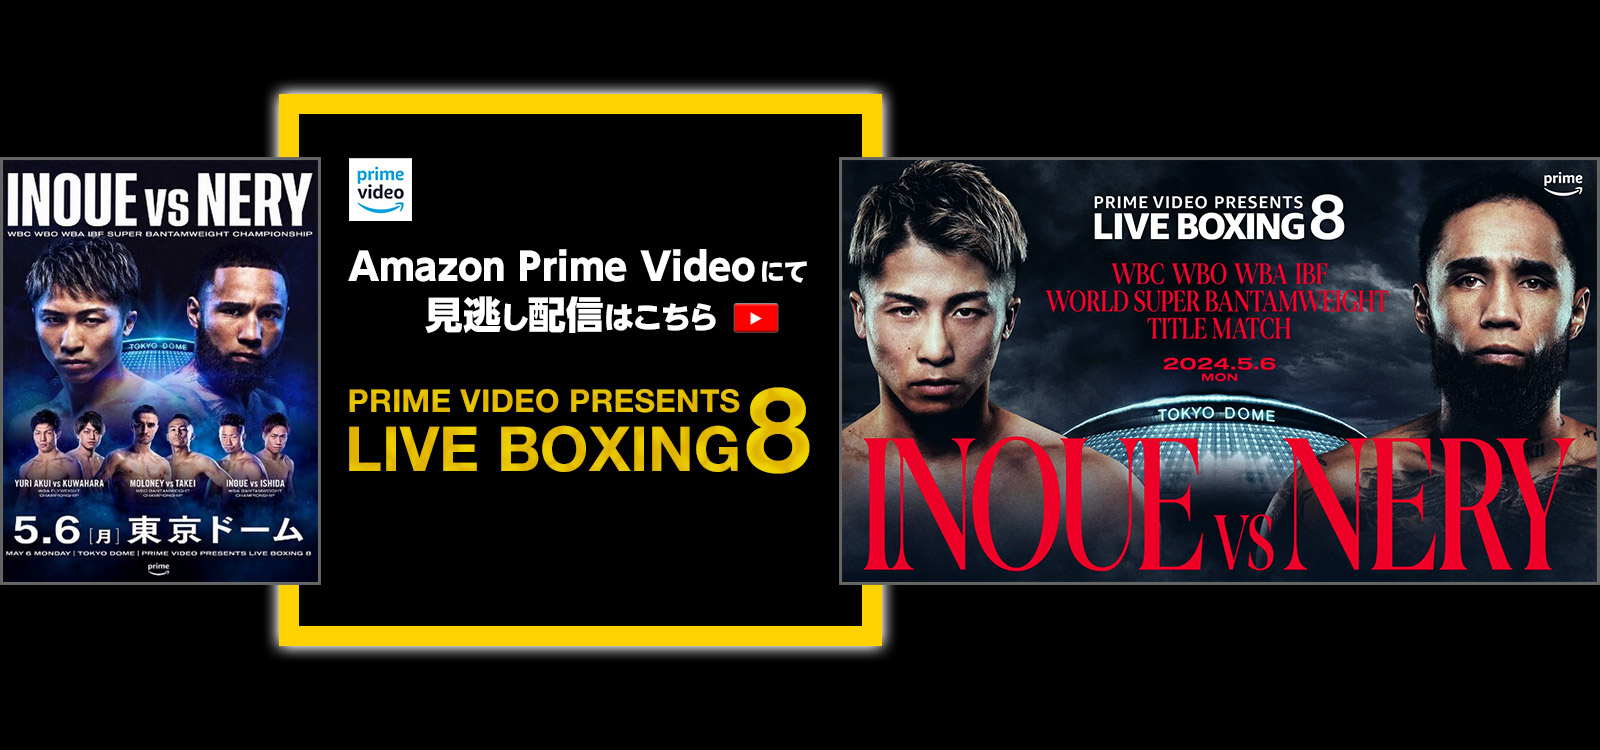 5/6 PRIME VIDEO PRESENTS LIVE BOXING 8 見逃し配信